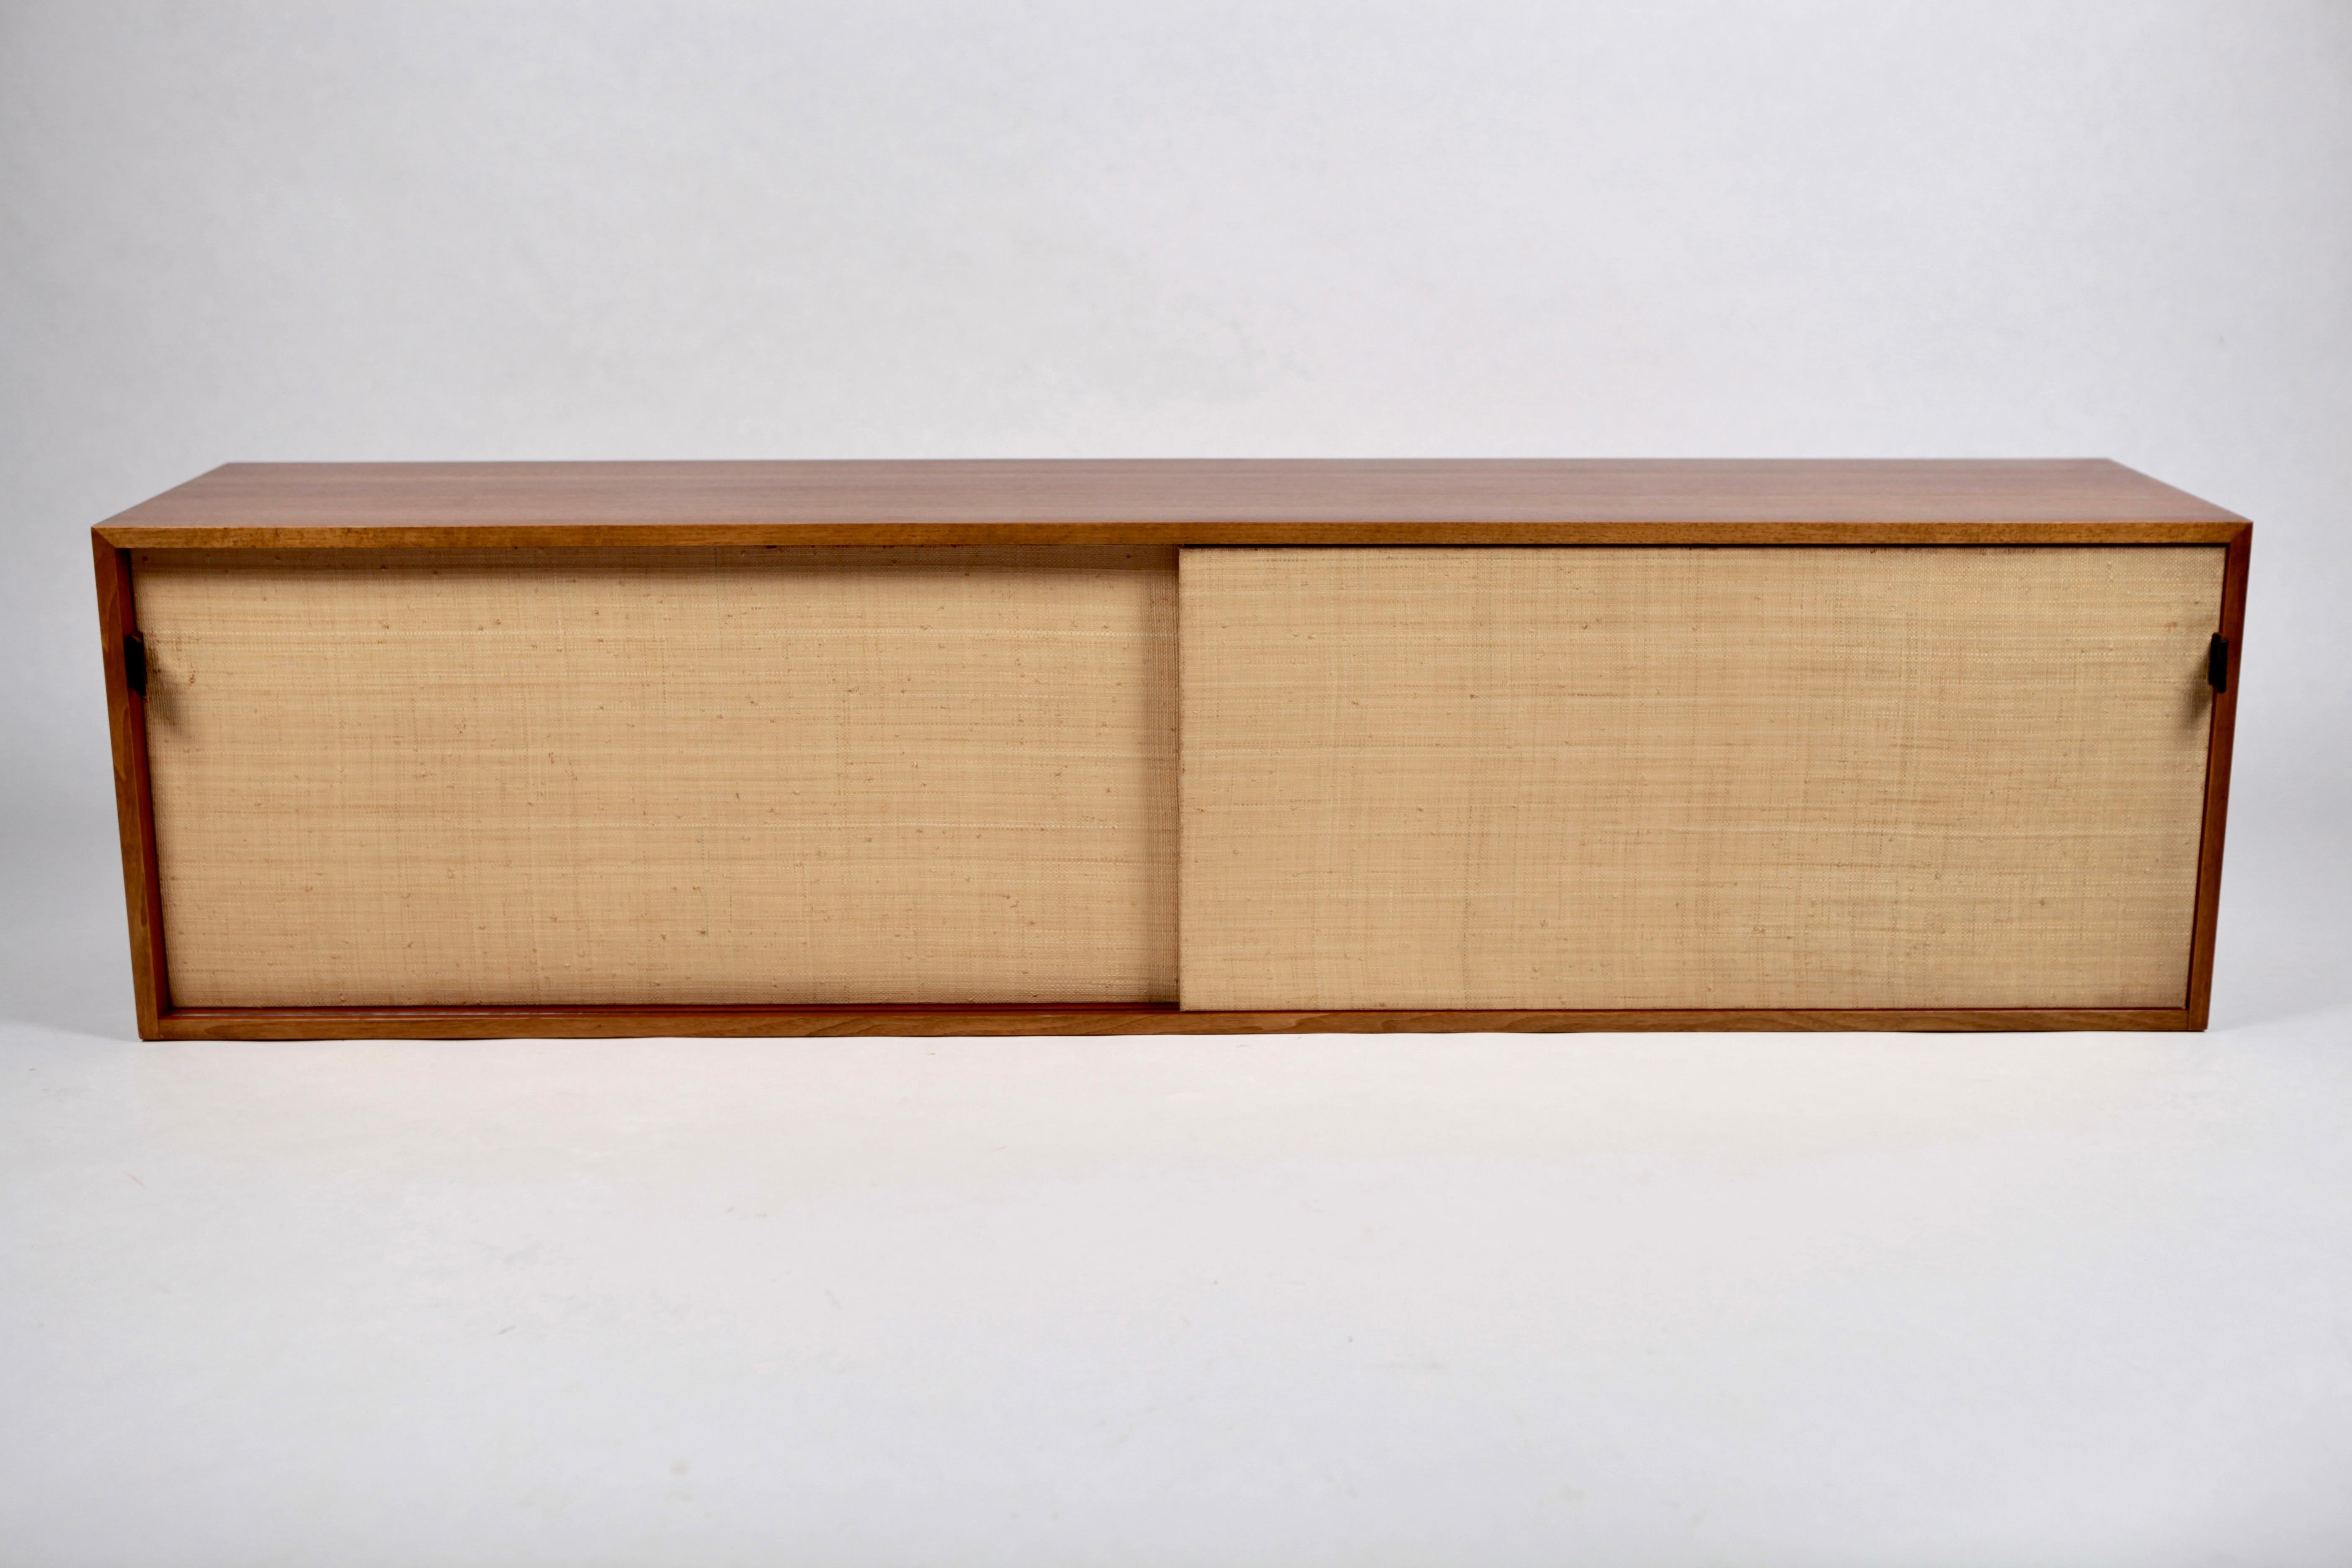 German Sideboard in Teak & Seagrass by Florence Knoll, Designed 1947